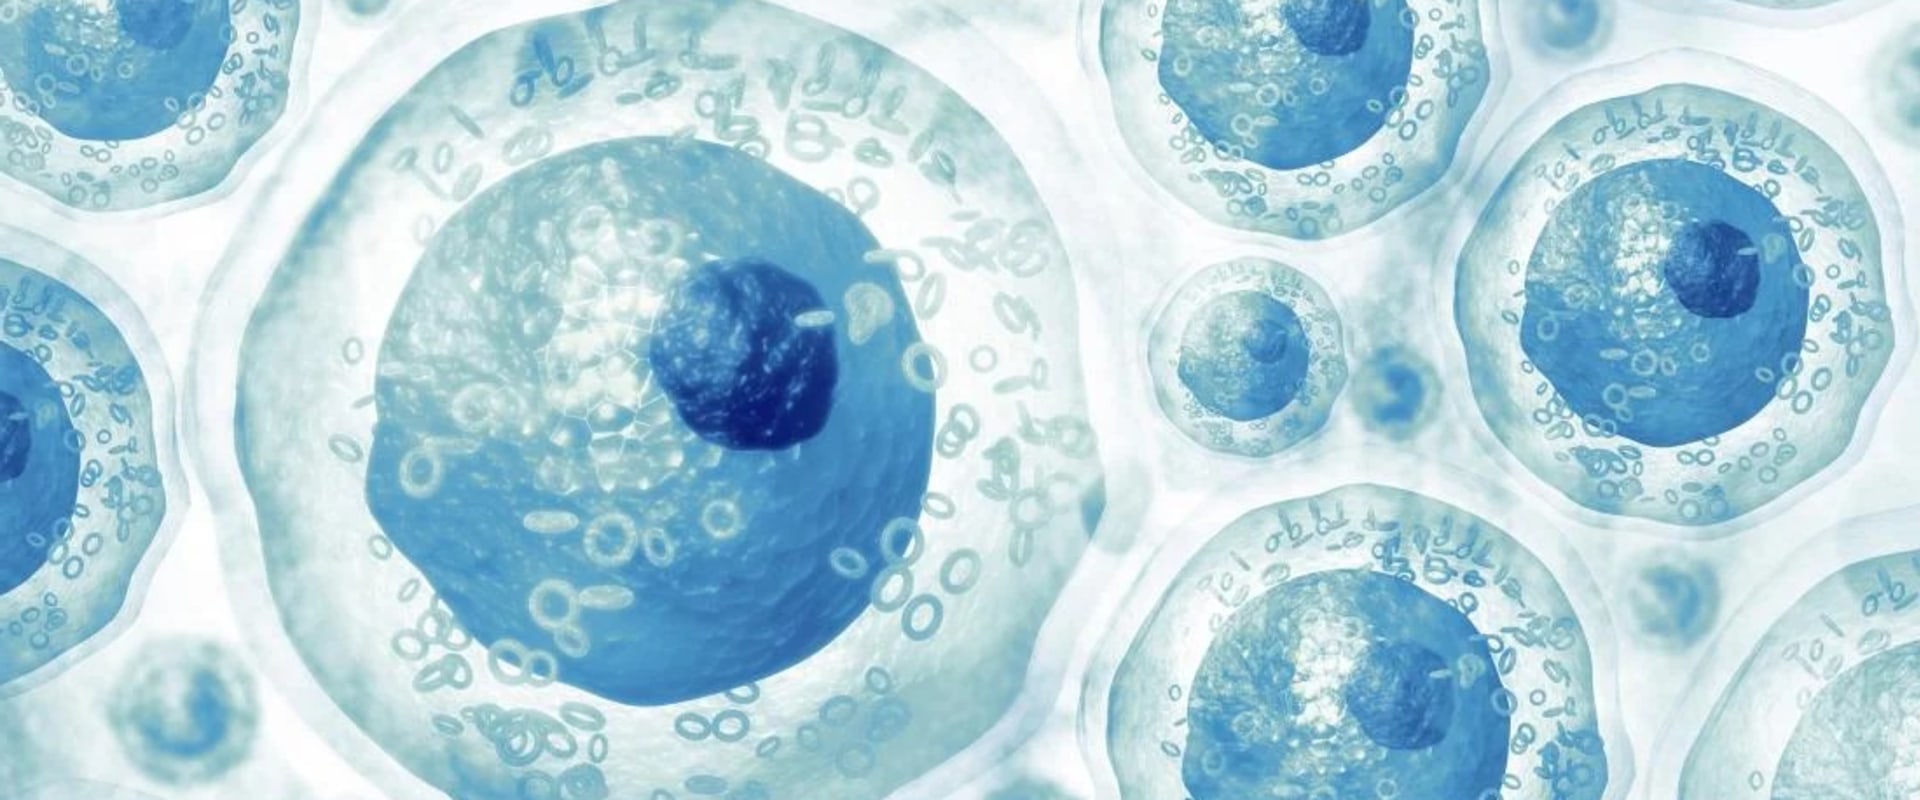 Can stem cells fix everything?